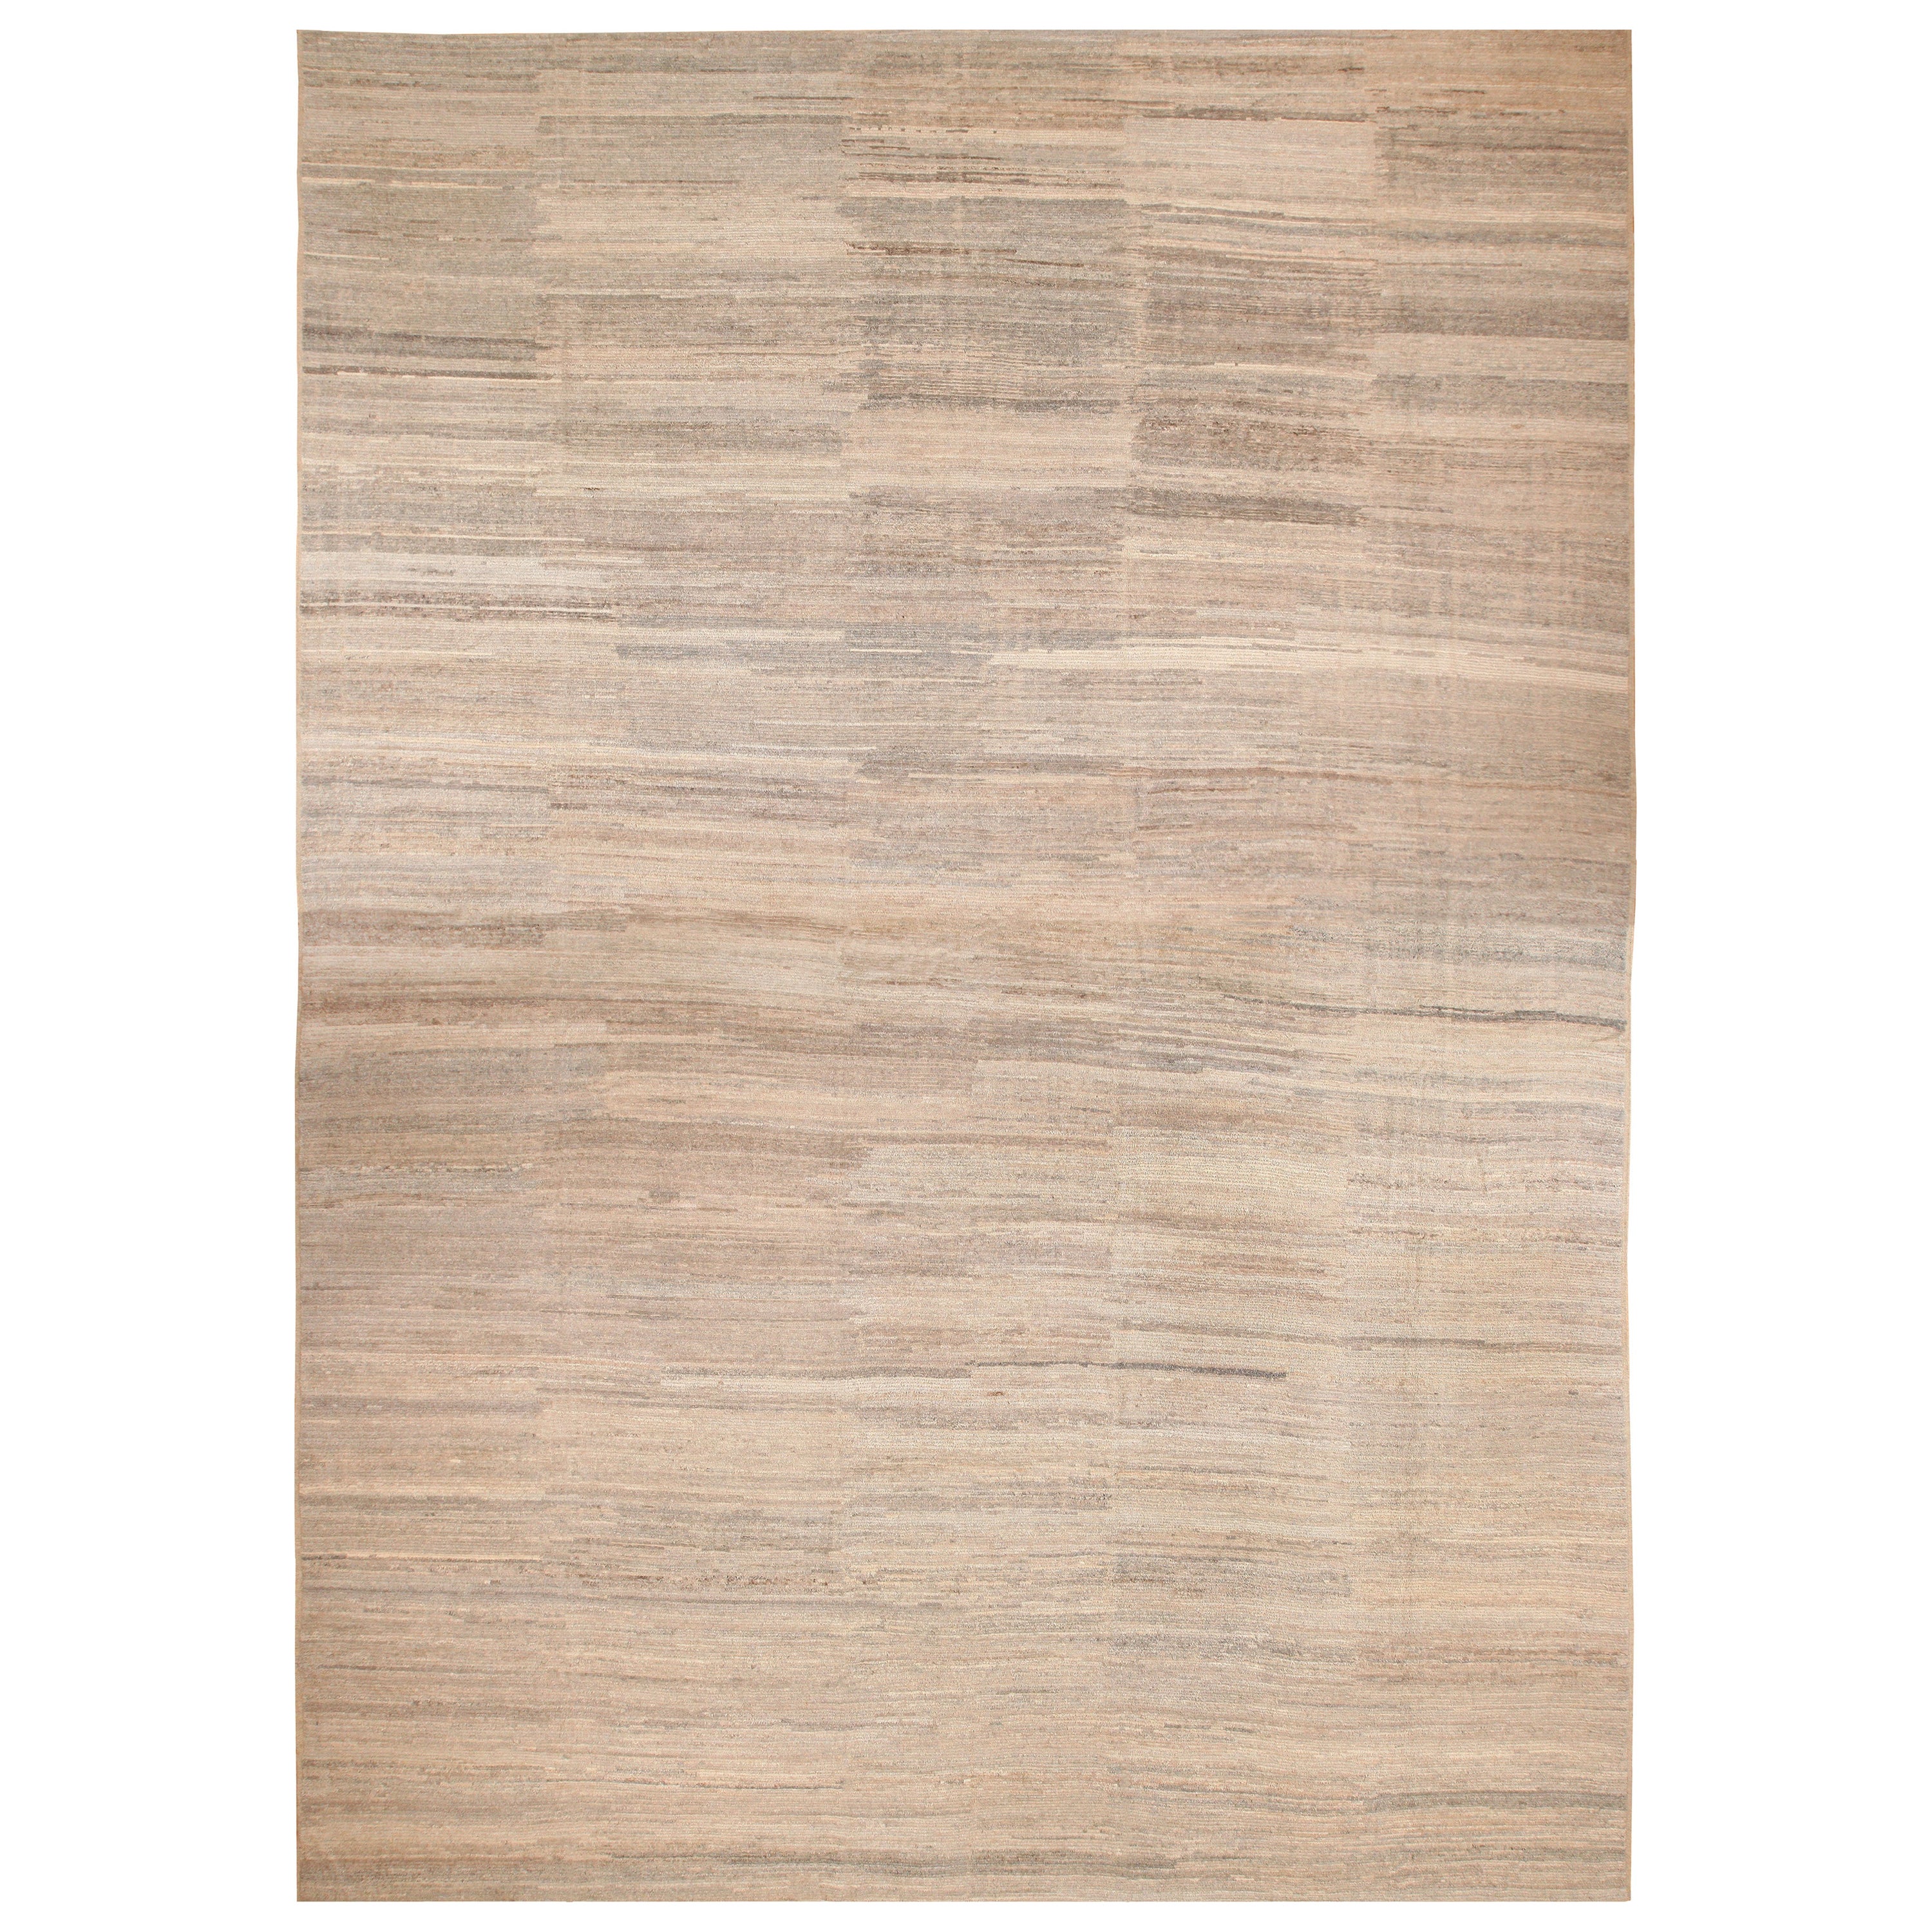 Nazmiyal Collection Beige Modern Distressed Rug. 18 ft 9 in x 25 ft 8 in For Sale